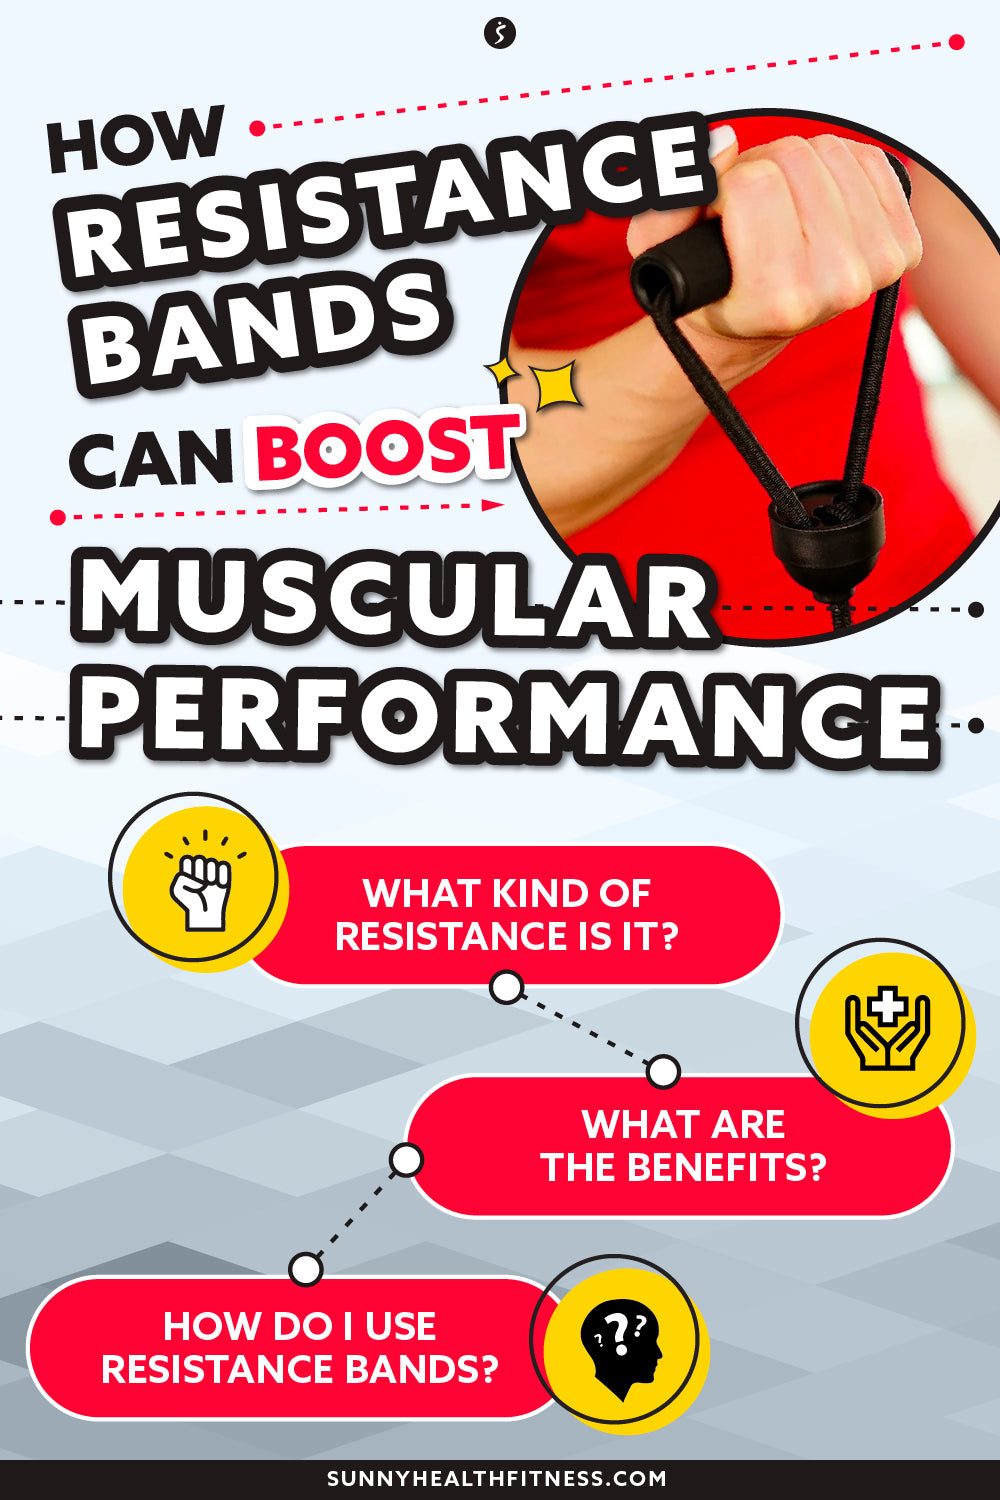 Resistance bands boost muscular performance